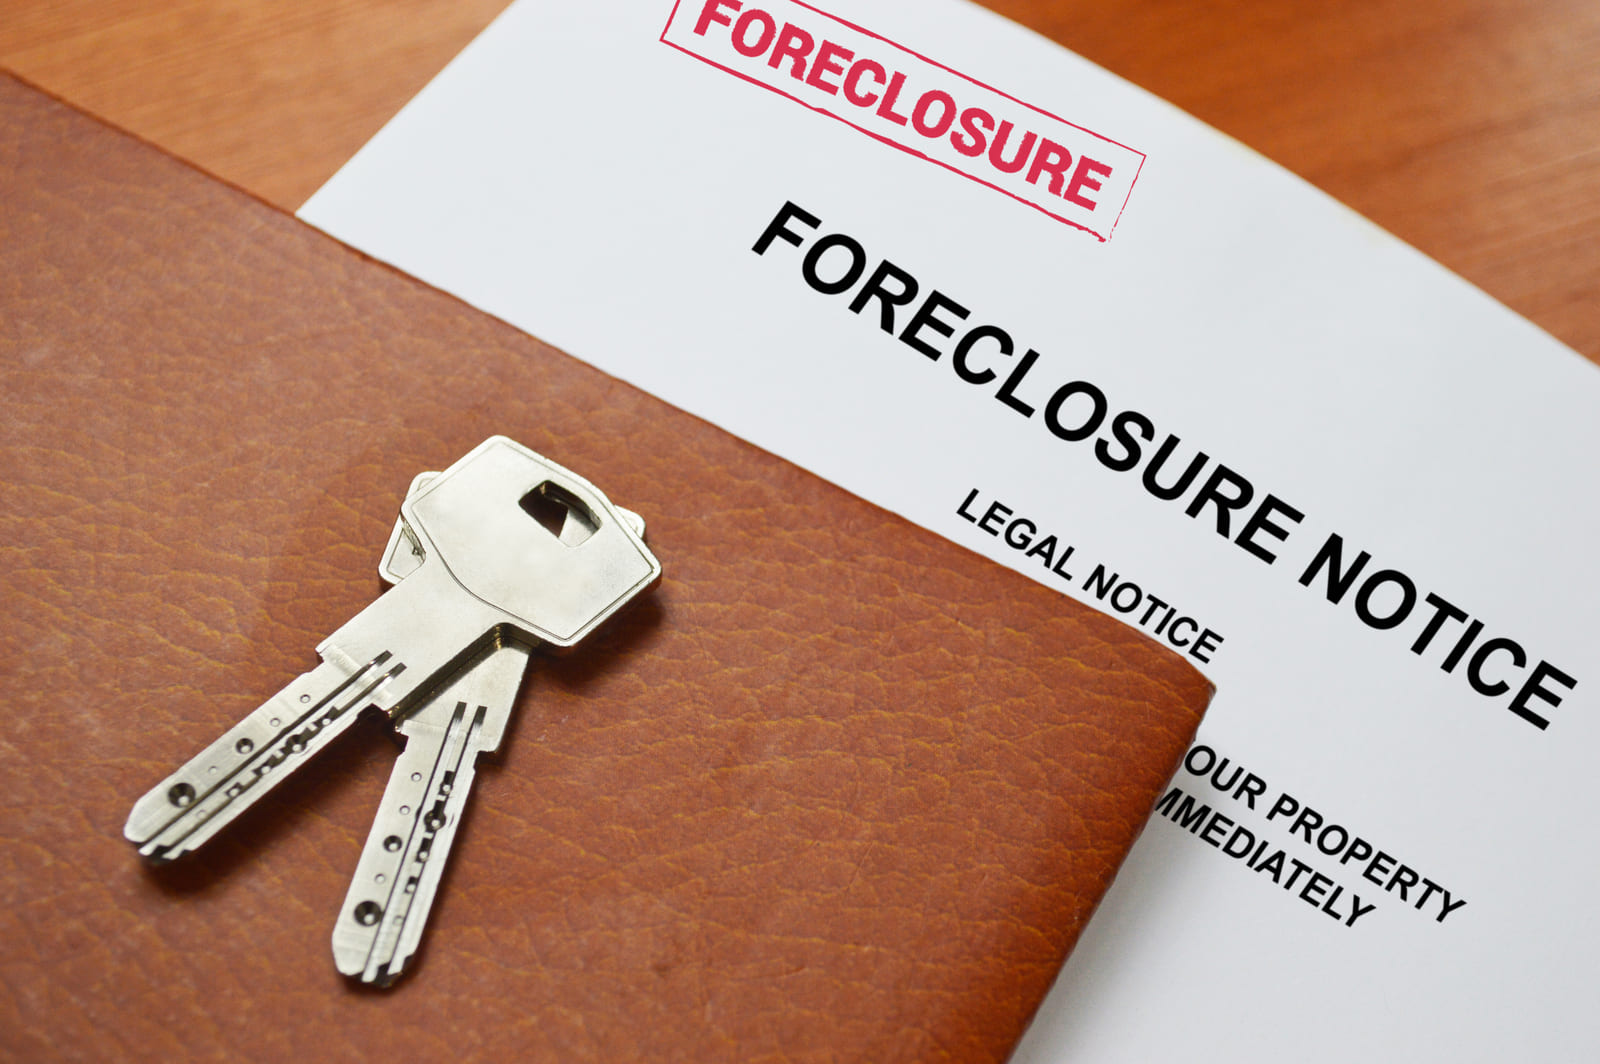 The number of foreclosures